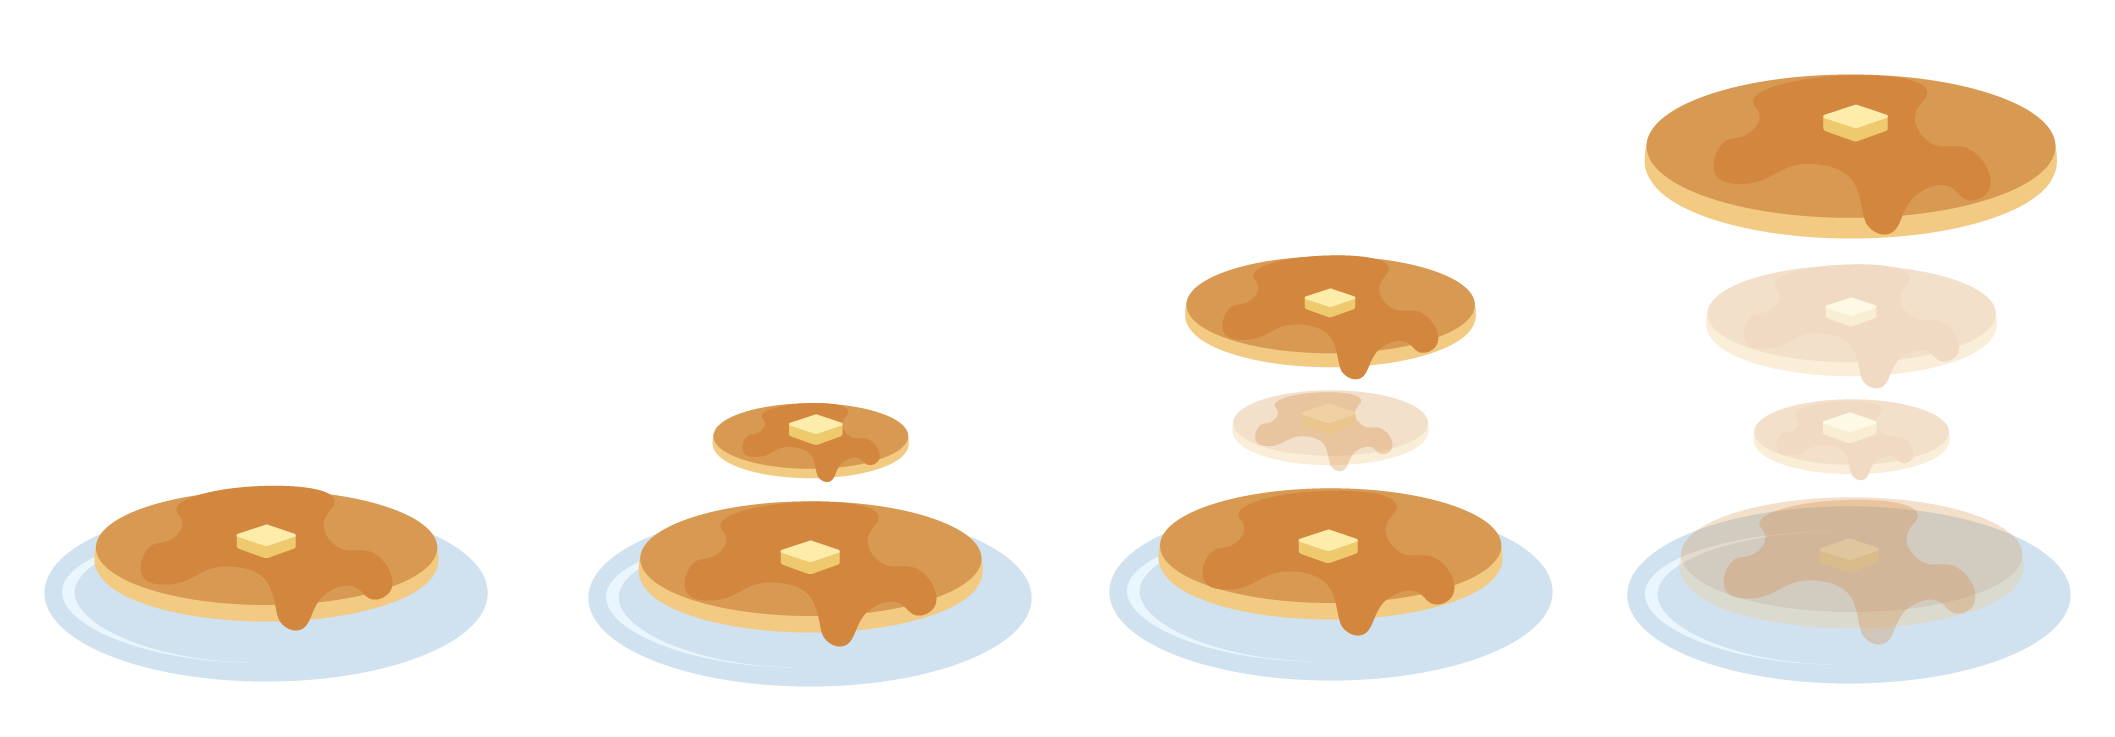 Four stacks with pancakes of radii 3, 3 and 1, 3, 1 and 2, and 3, 1, 2 and 4.